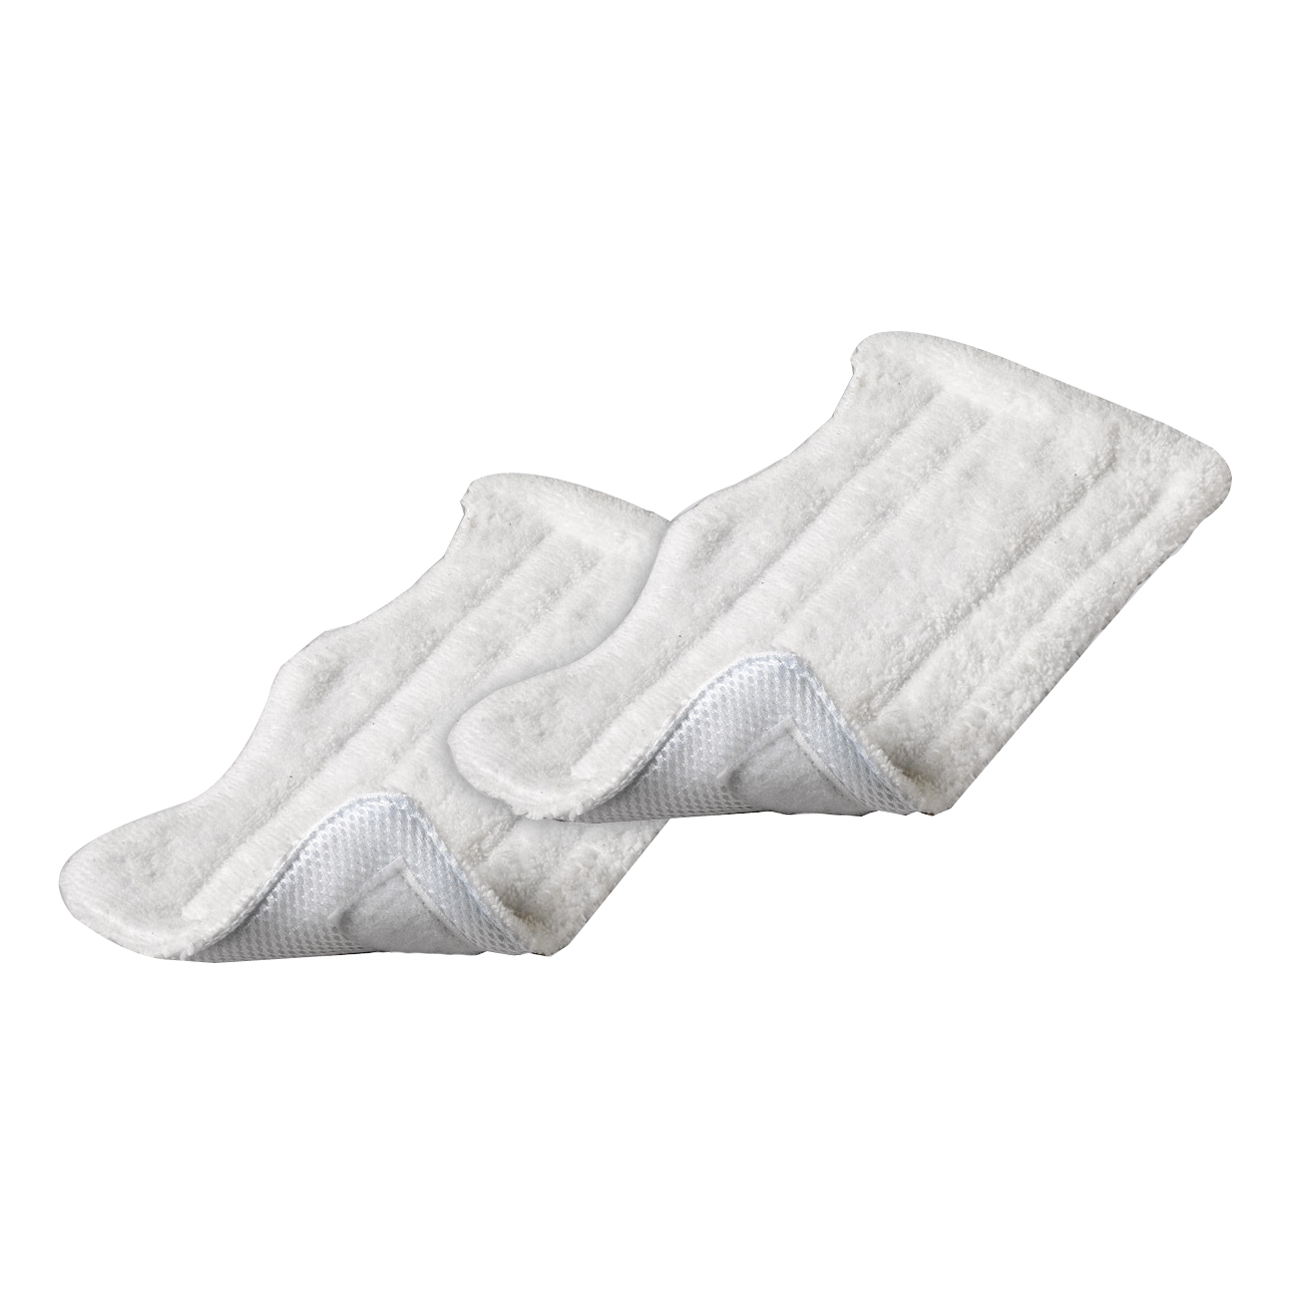 Shark Steam Mop Replacement Pads, 2-Pack - image 1 of 2